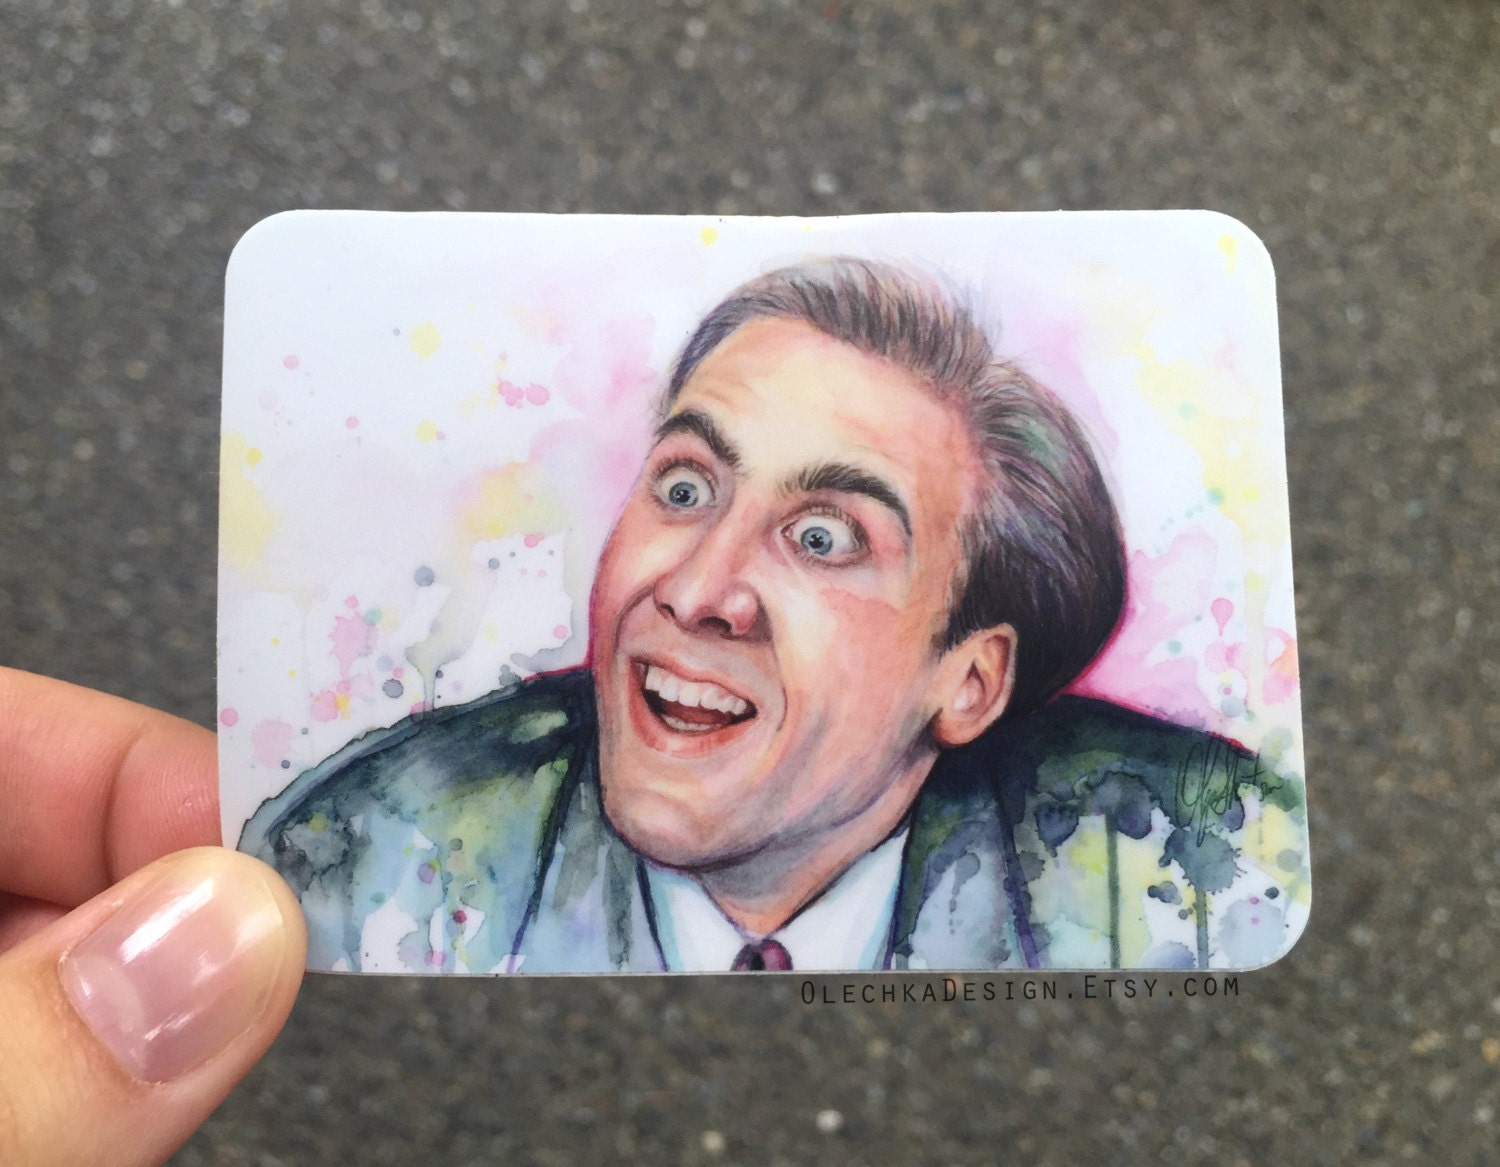 Nicolas Cage Meme Stickers SET Funny Stickers Geek Sticker Nic Cage You Dont Say Durable Vinyl Weatherproof Funny Geek Stickers